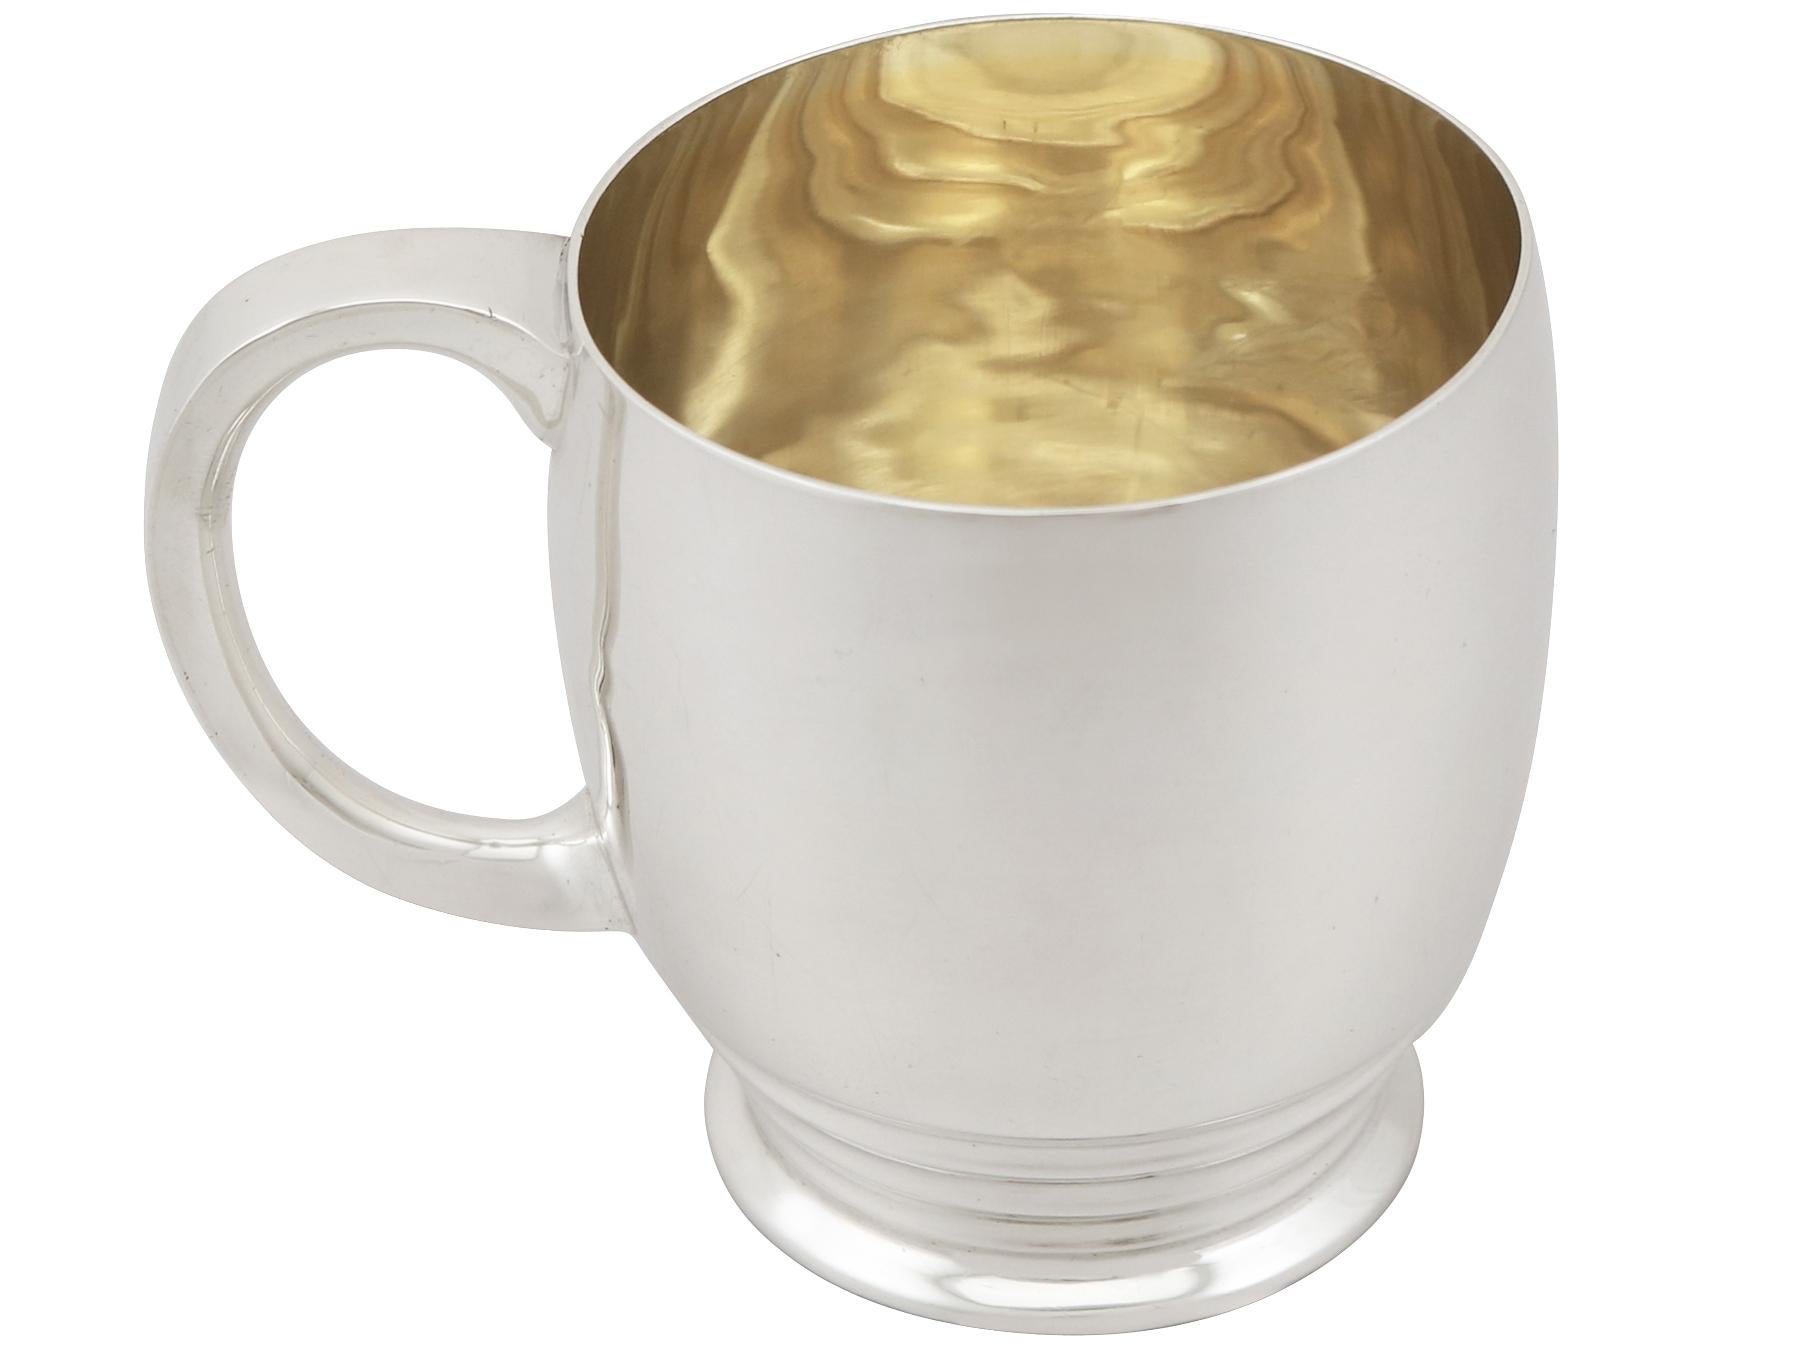 A fine and impressive antique Edward VIII English sterling silver christening mug in the Art Deco style; an addition to our Art Deco silverware collection.

This fine antique Edward VIII sterling silver christening mug has a plain circular rounded